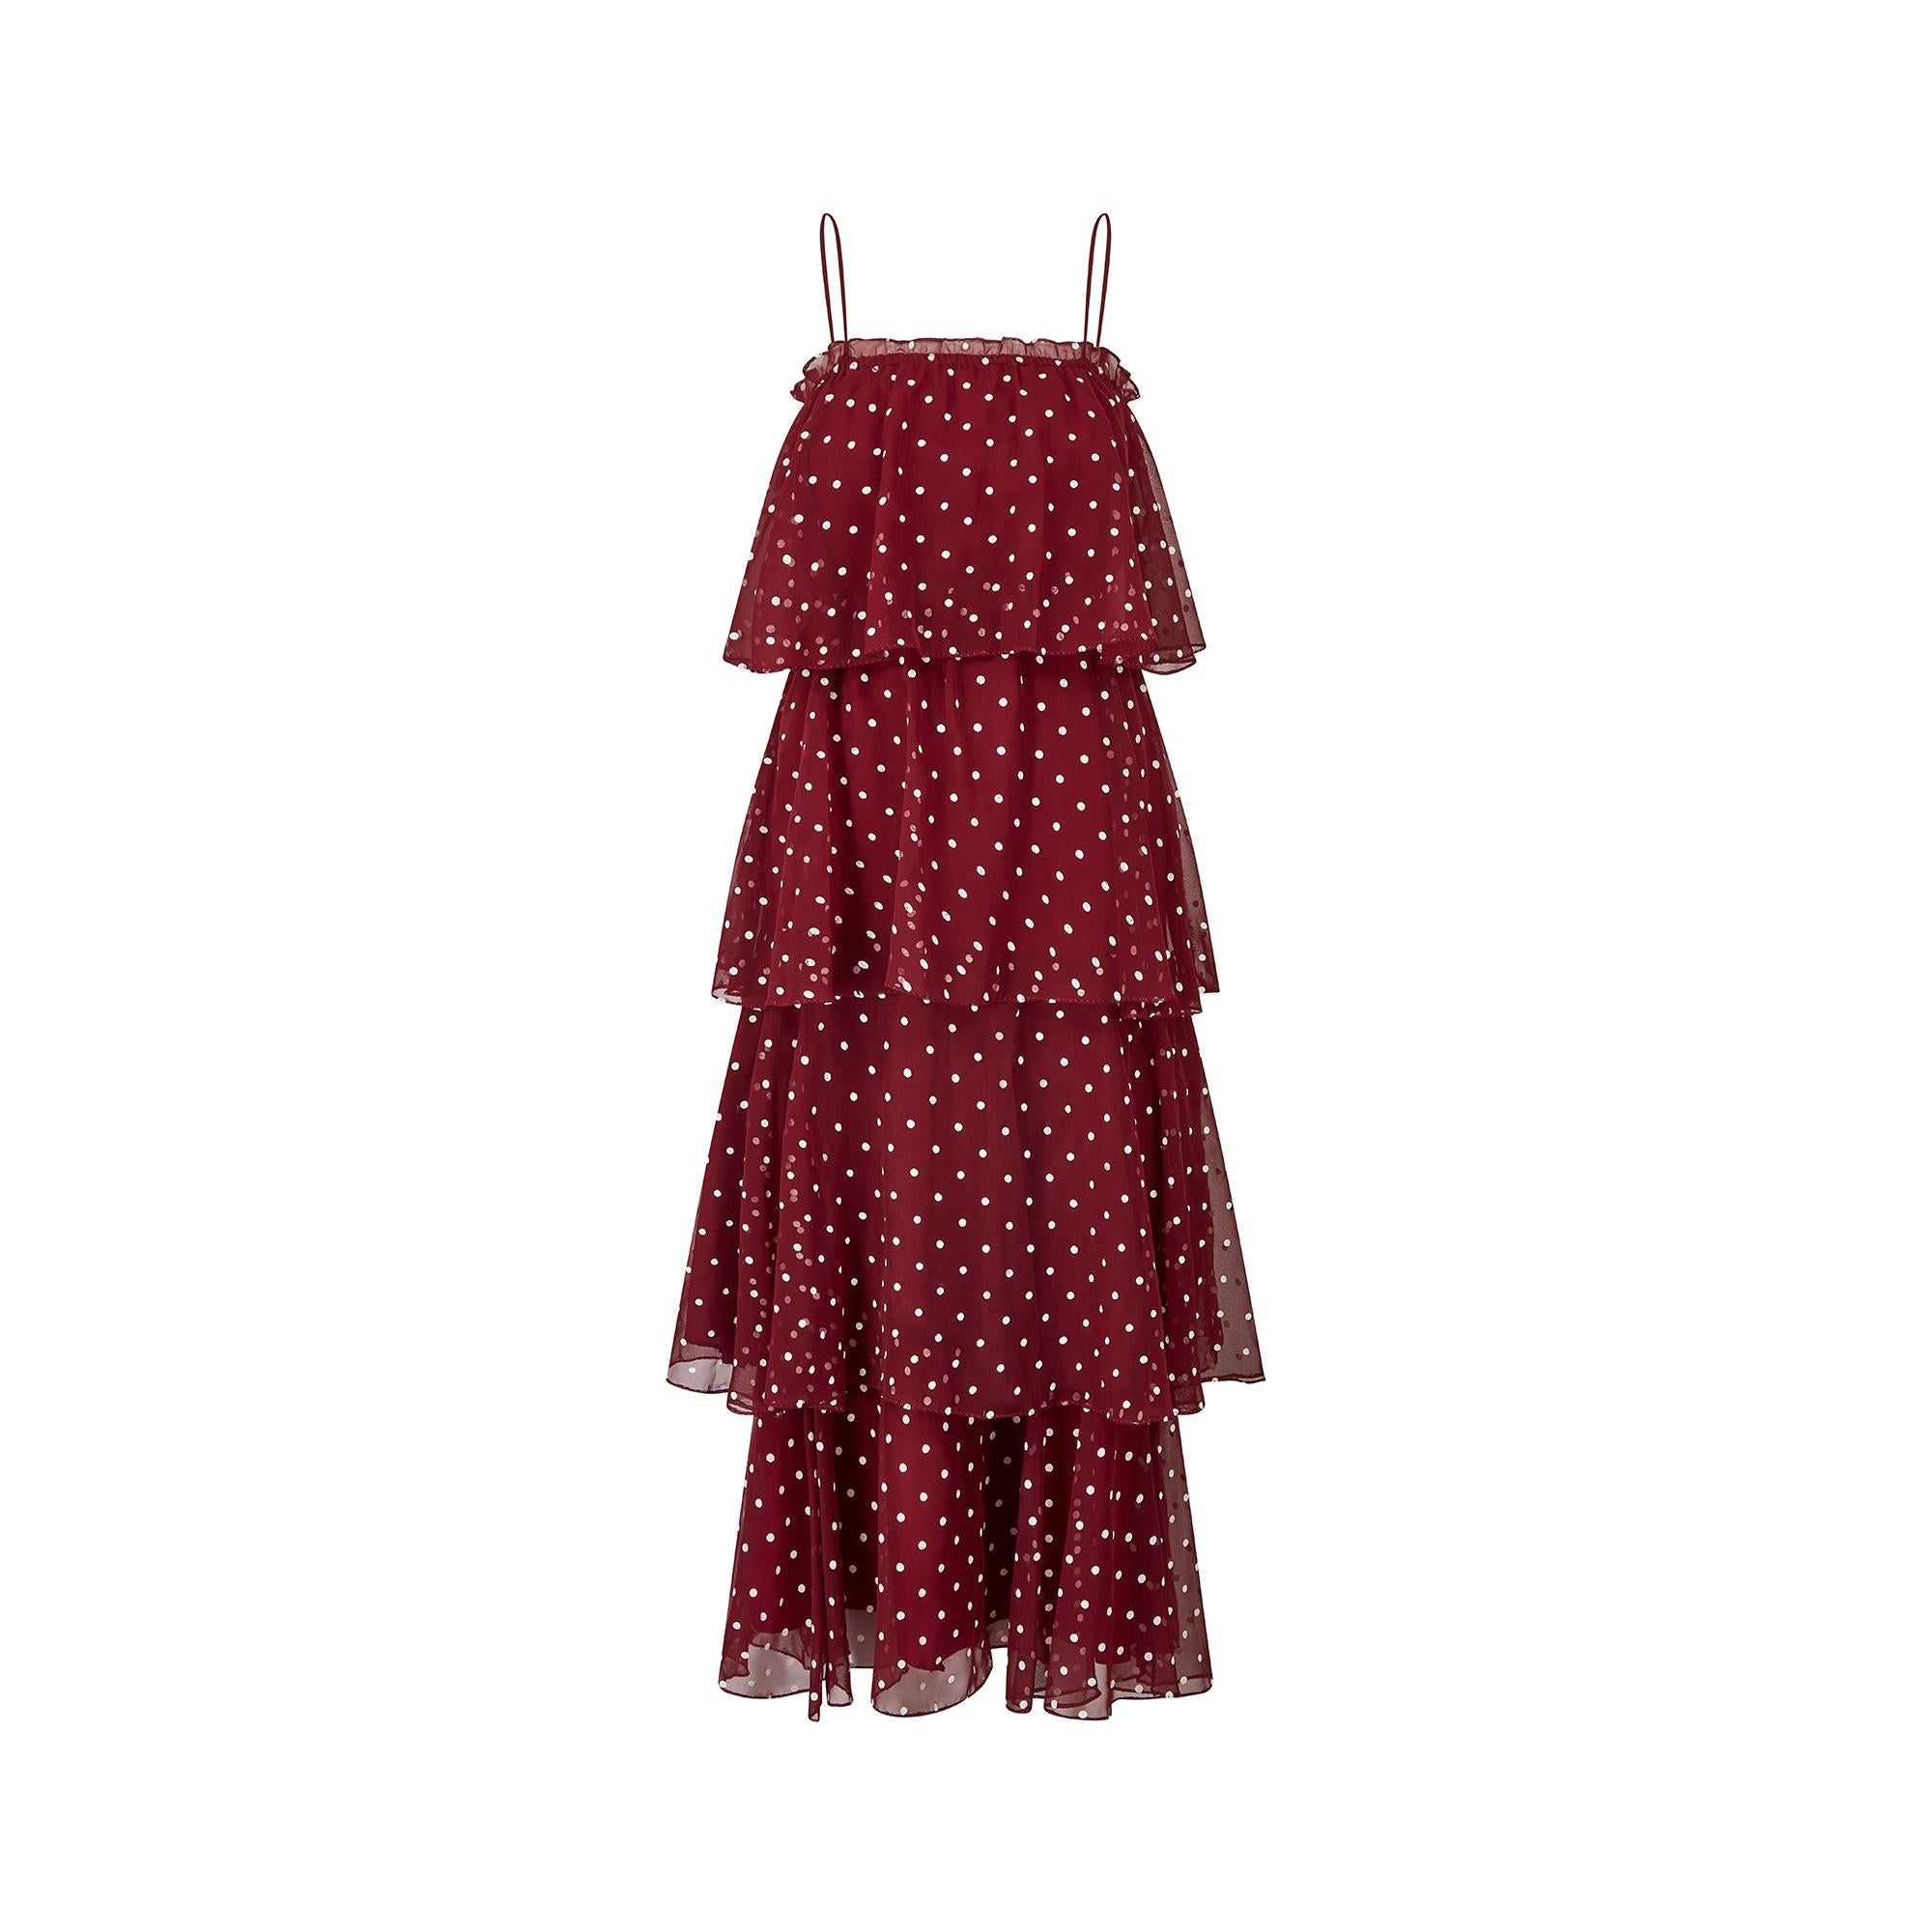 Unusual late 1970s burgundy and white polka dot tiered dress by Norman Berg.  It consists of an under skirt with a wide polka dot flounce making up the bottom or 4th tier.  The second element is a shorter top dress which slips on over the head with